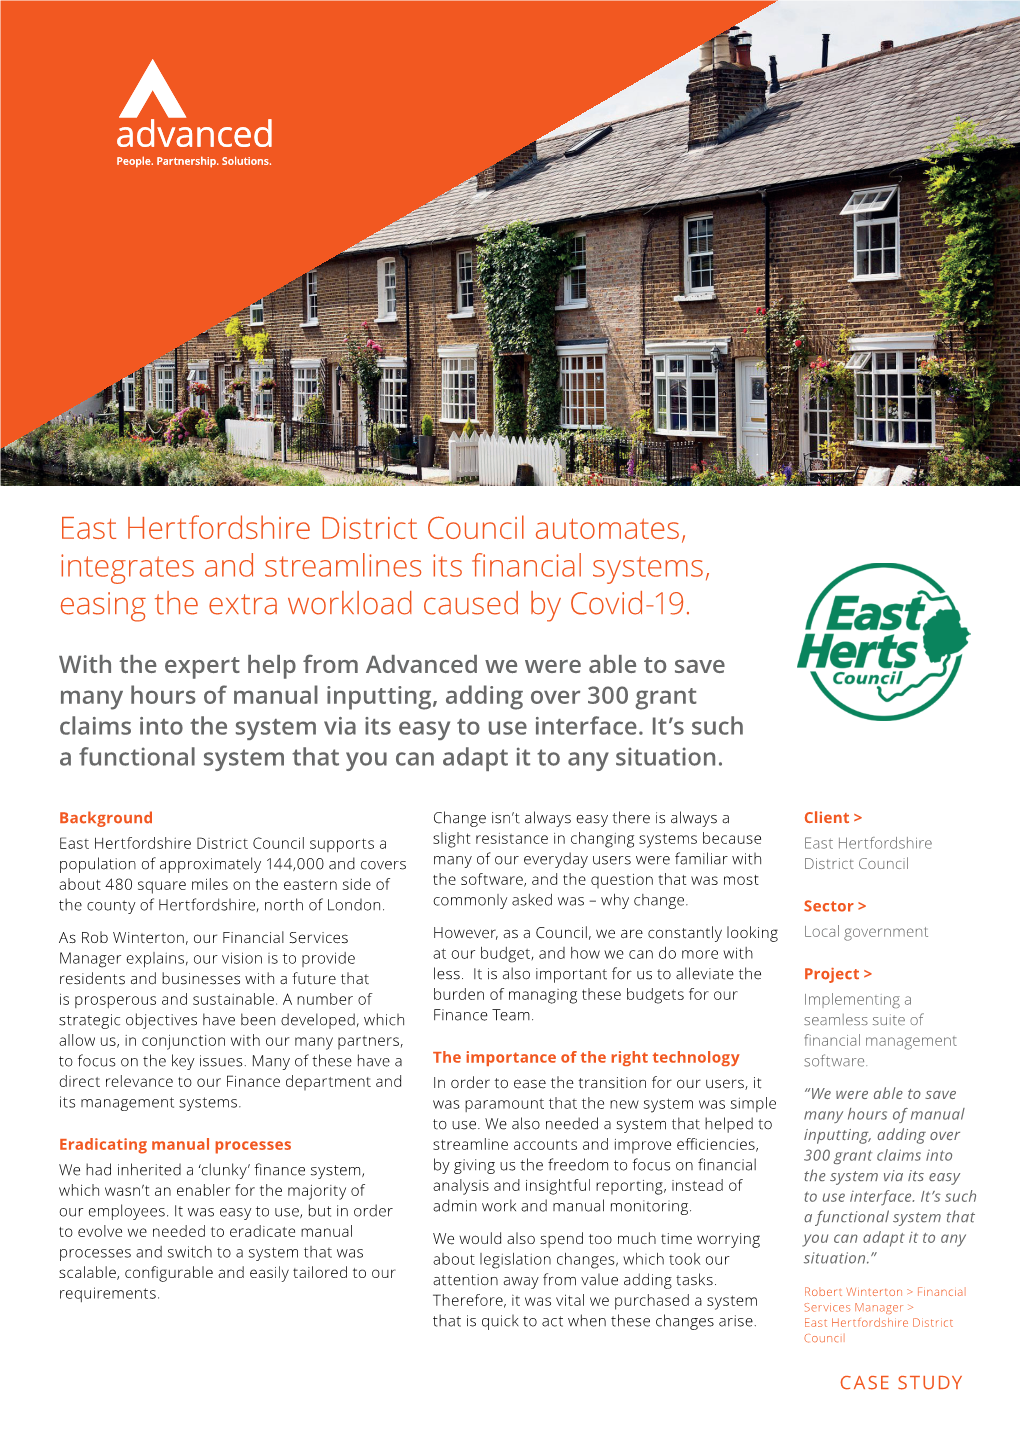 East Hertfordshire District Council Automates, Integrates and Streamlines Its Financial Systems, Easing the Extra Workload Caused by Covid-19